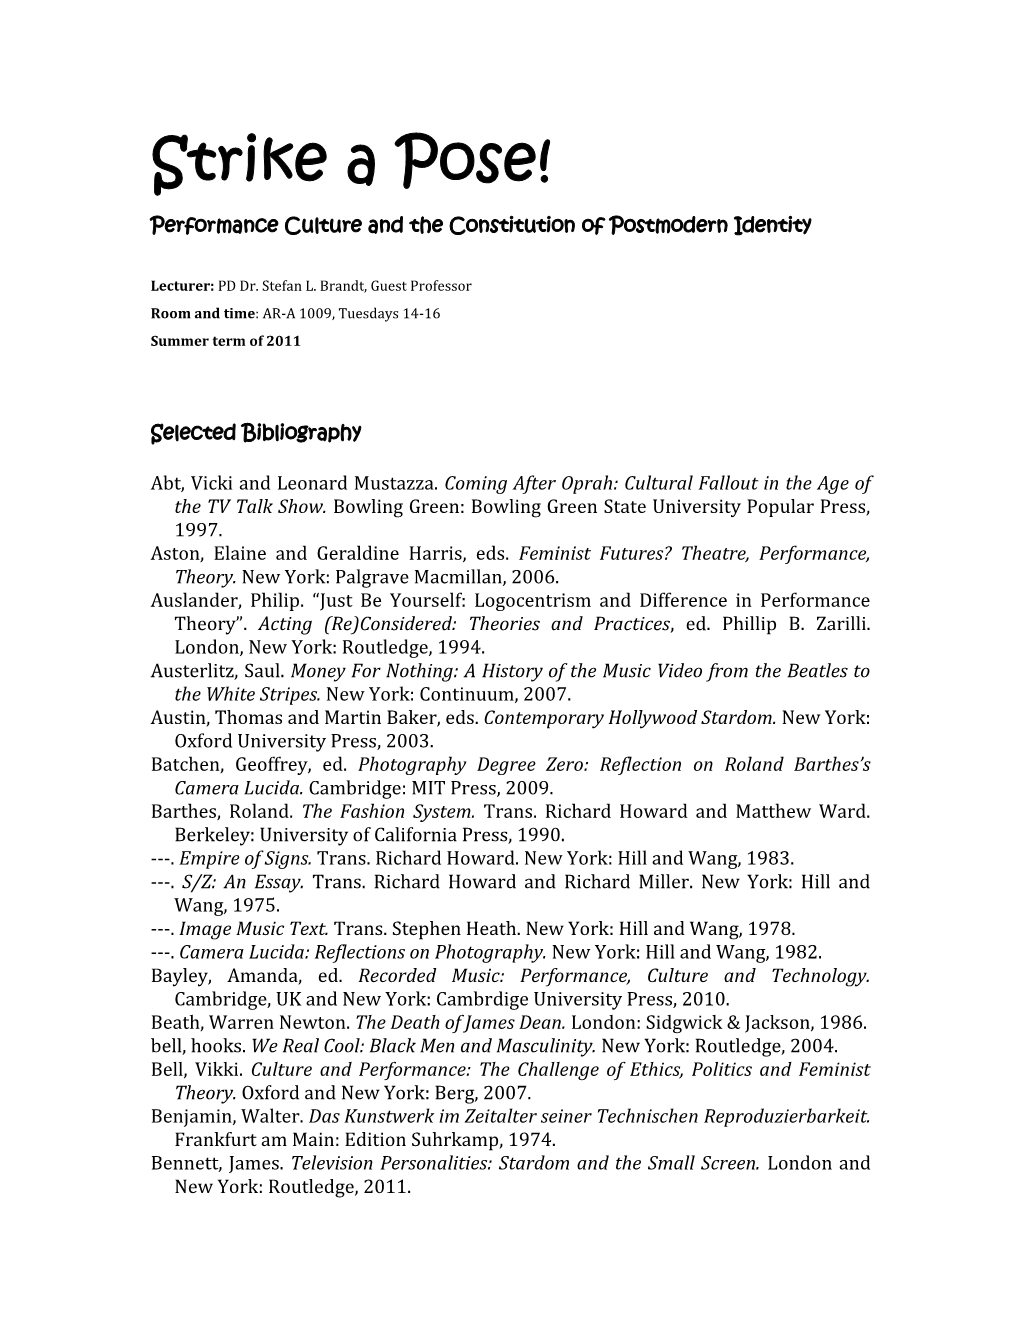 Strike a Pose! Performance Culture and the Constitution of Postmodern Identity